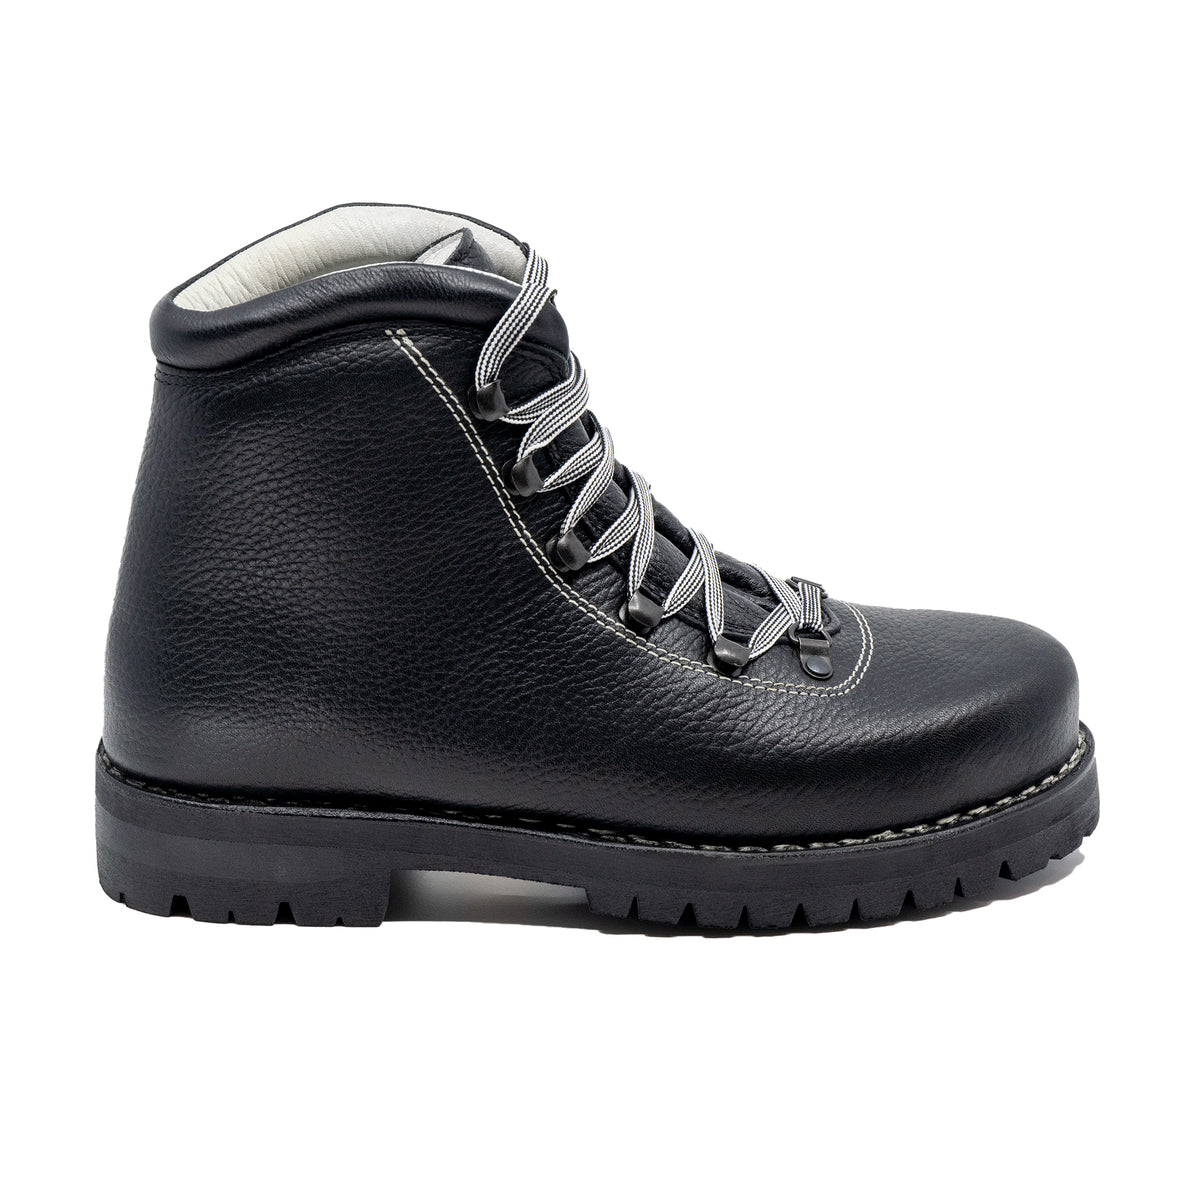 The Standard - Limmer Boots